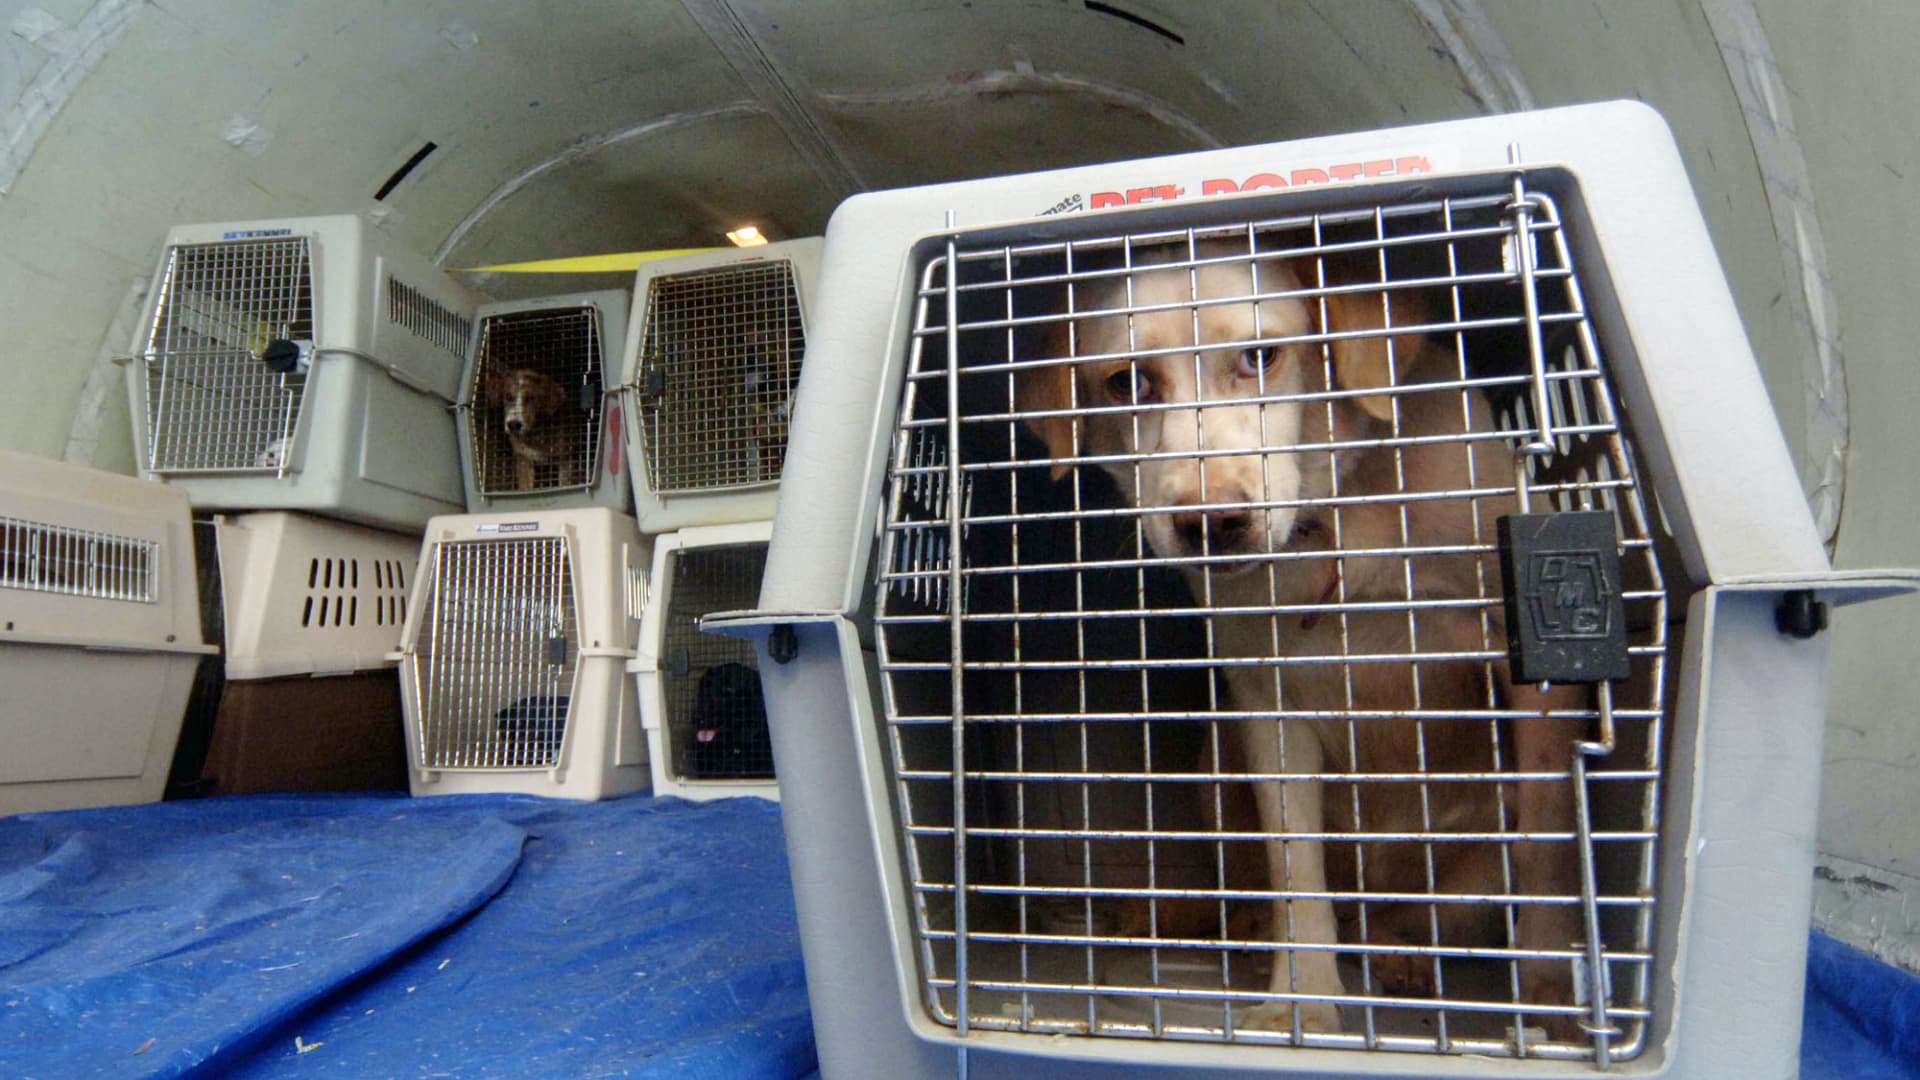 United Airlines bans dozens of animals after pet deaths, mix-ups